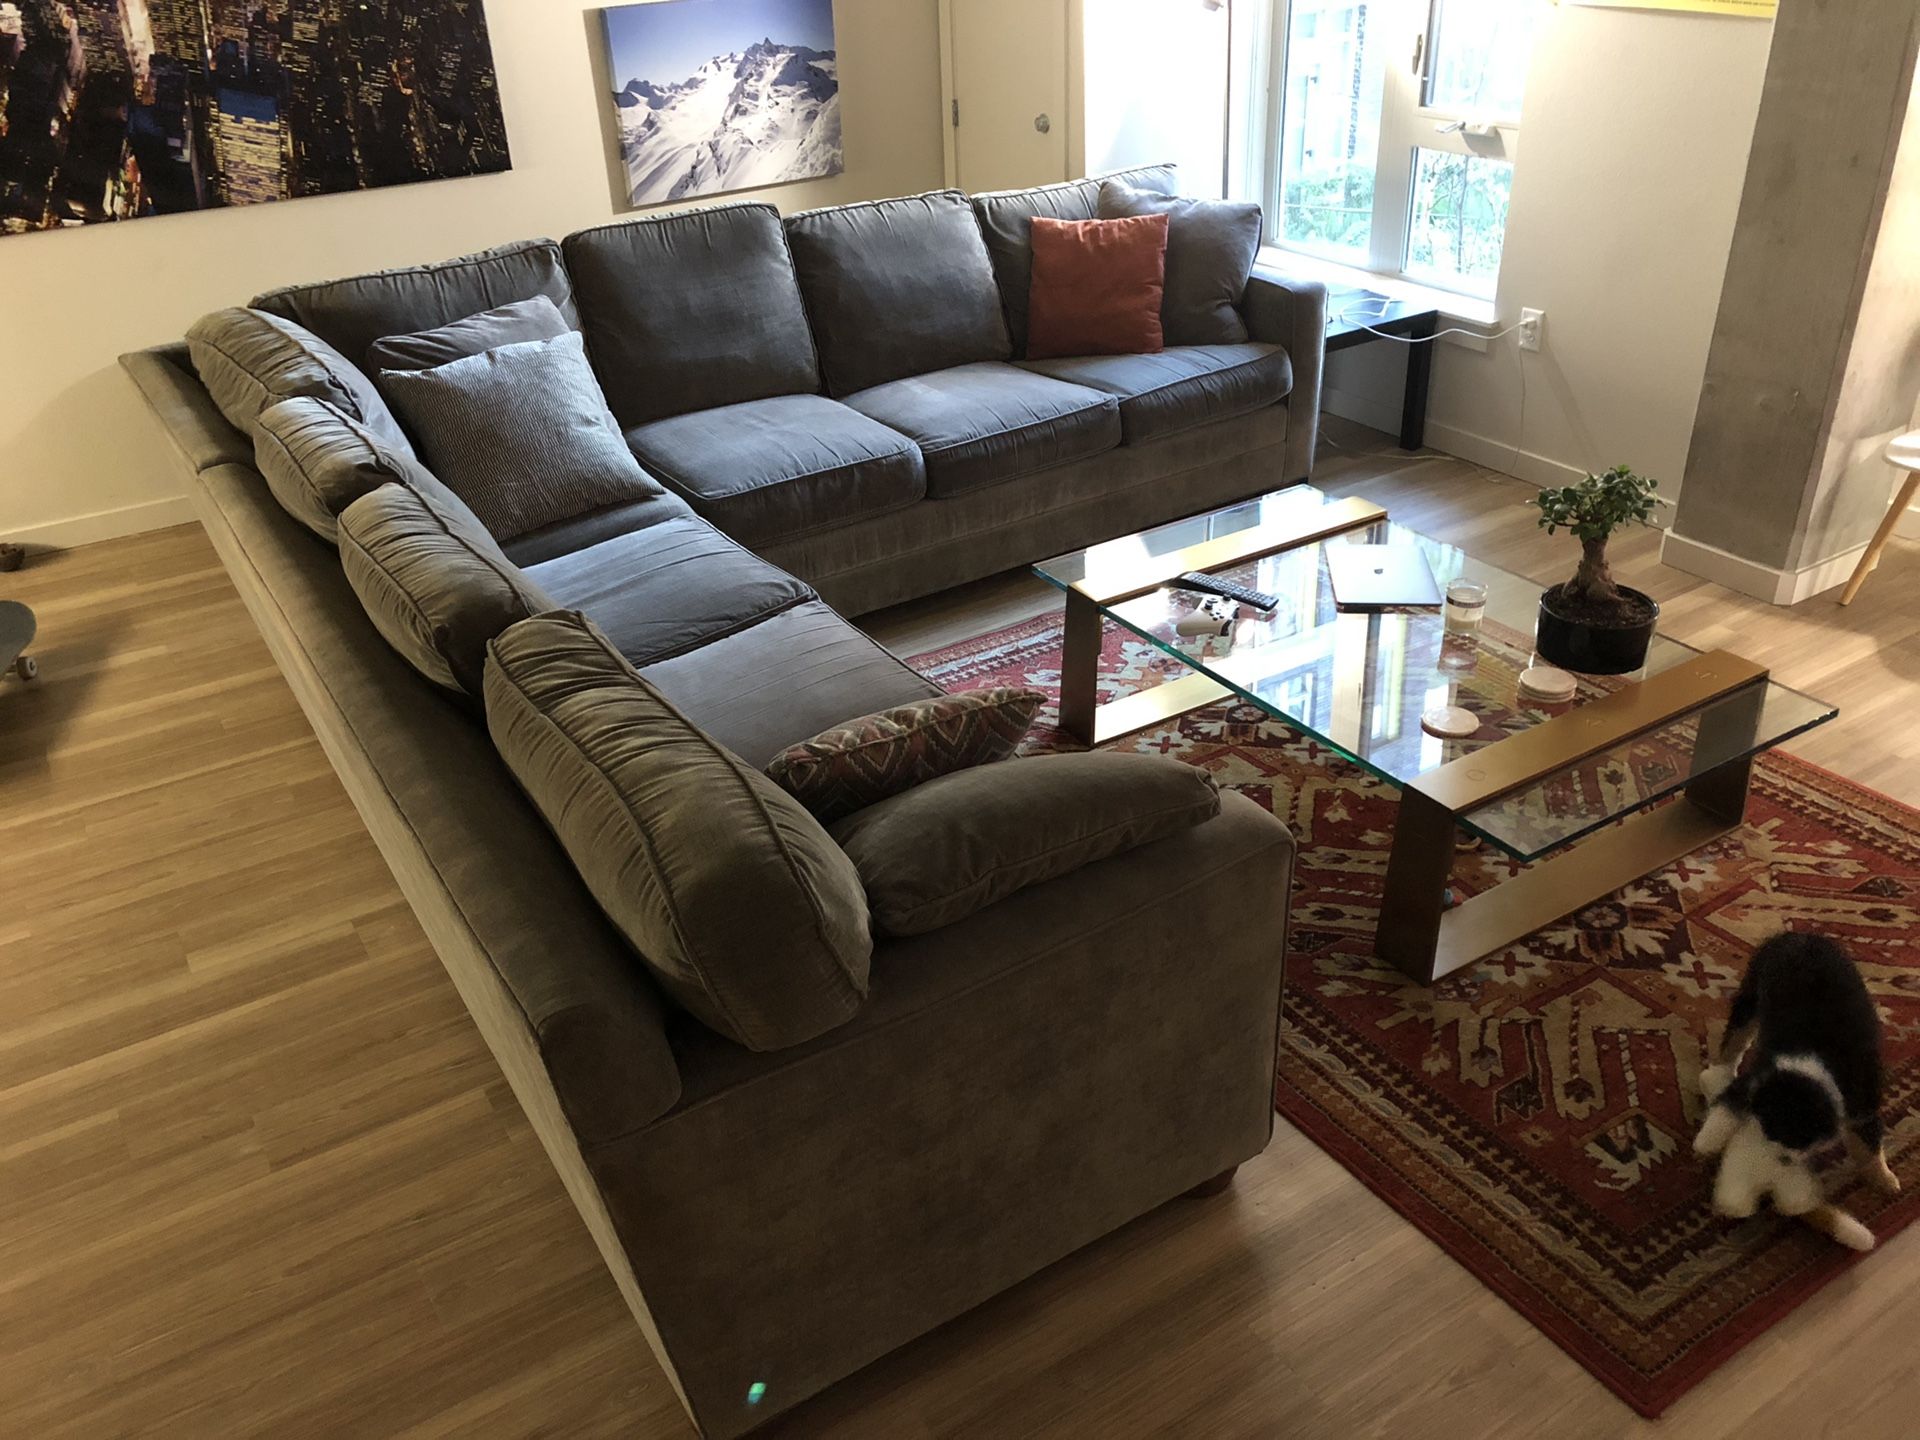 9x9 three piece sectional couch sofa